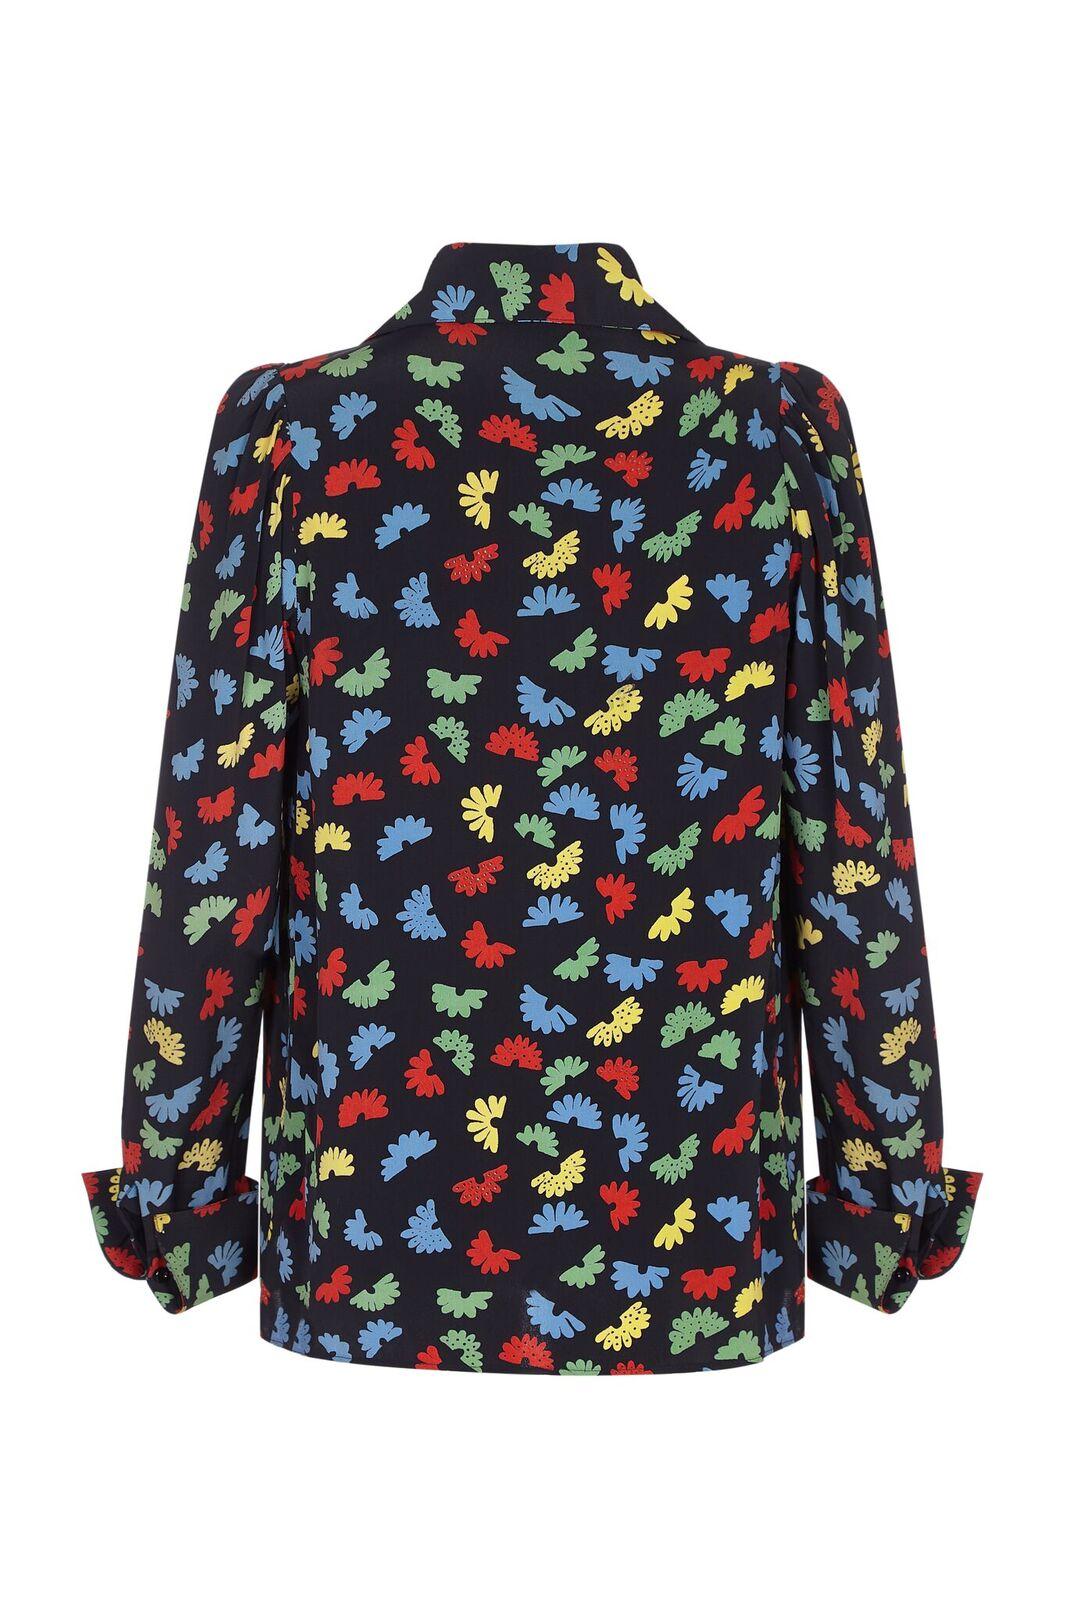 This vibrant Ossie Clarke 1960s blouse with abstracted floral print by celebrated textile designer Celia Birtwell is part of the designer's rare main line label and is therefore a collectable piece of fashion history. Clark's flamboyant designs